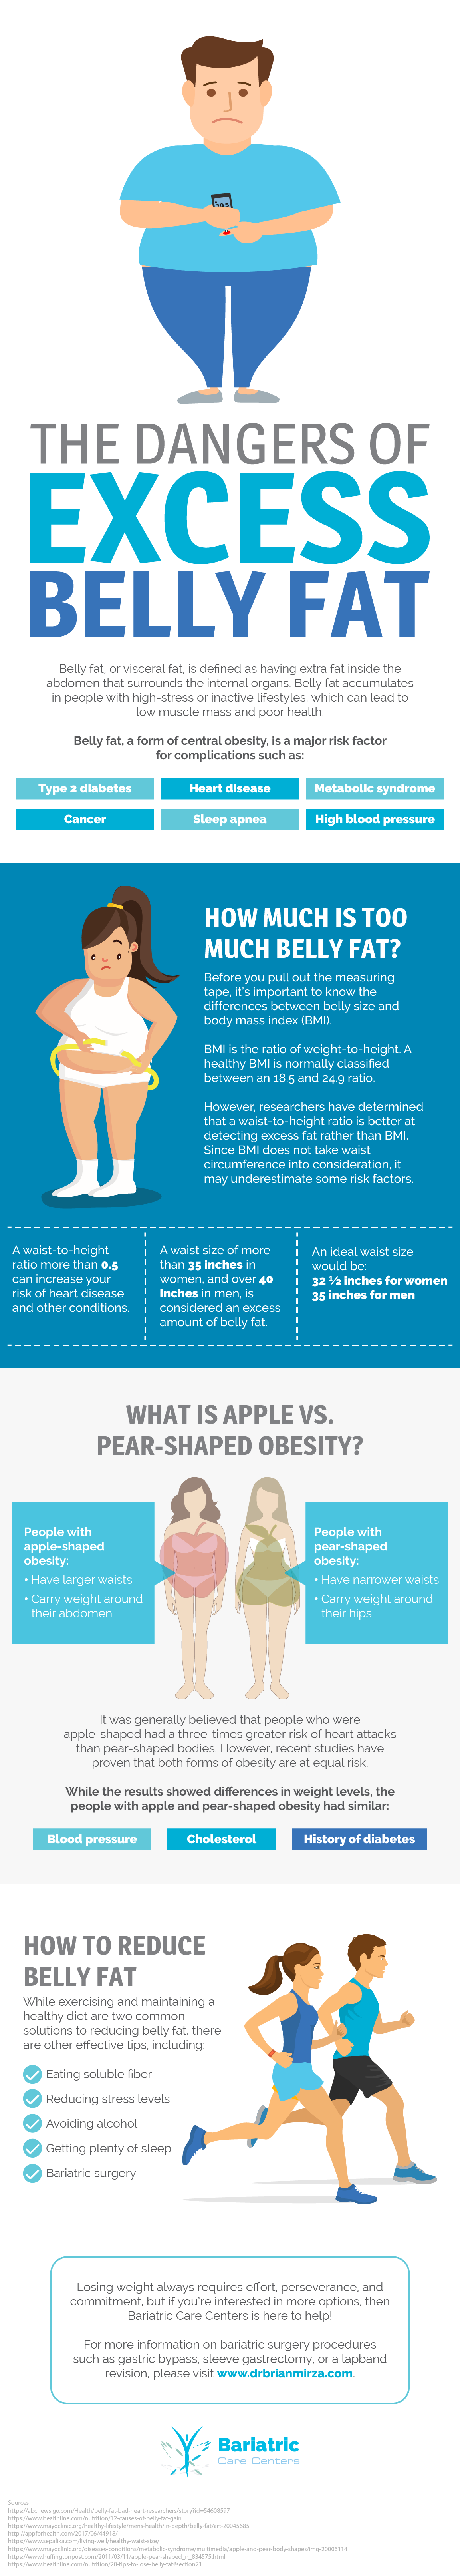 The Dangers of Excess Belly Fat